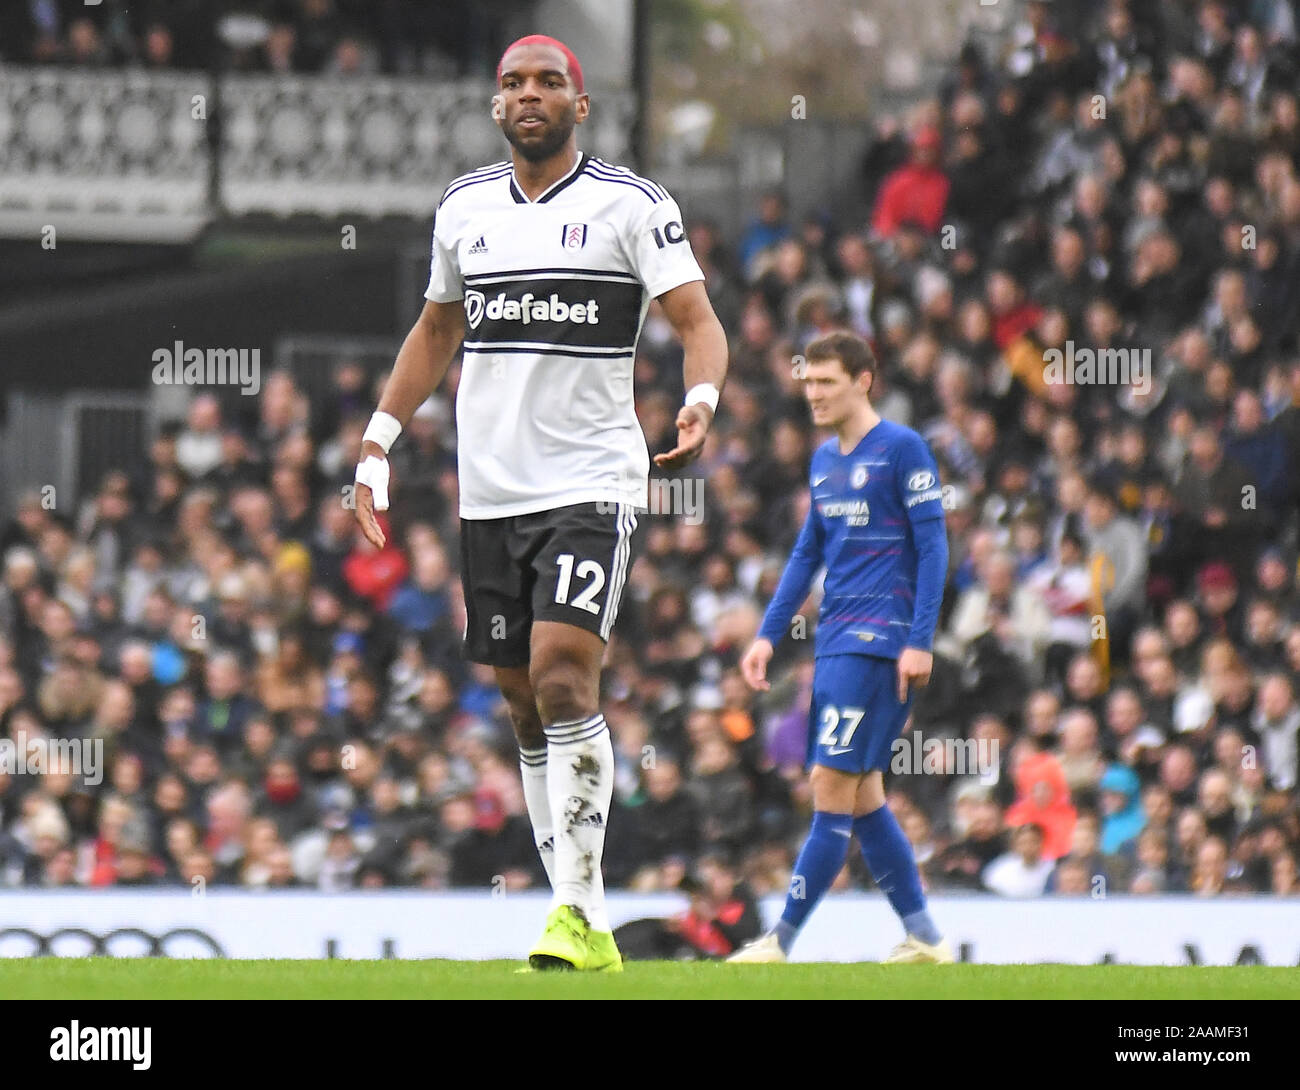 LONDON, ENGLAND - MARCH 3, 2019: Ryan Babel of Fulham pictured during the 2018/19 Premier League game between Fulham FC and Chelsea FC at Craven Cottage. Stock Photo